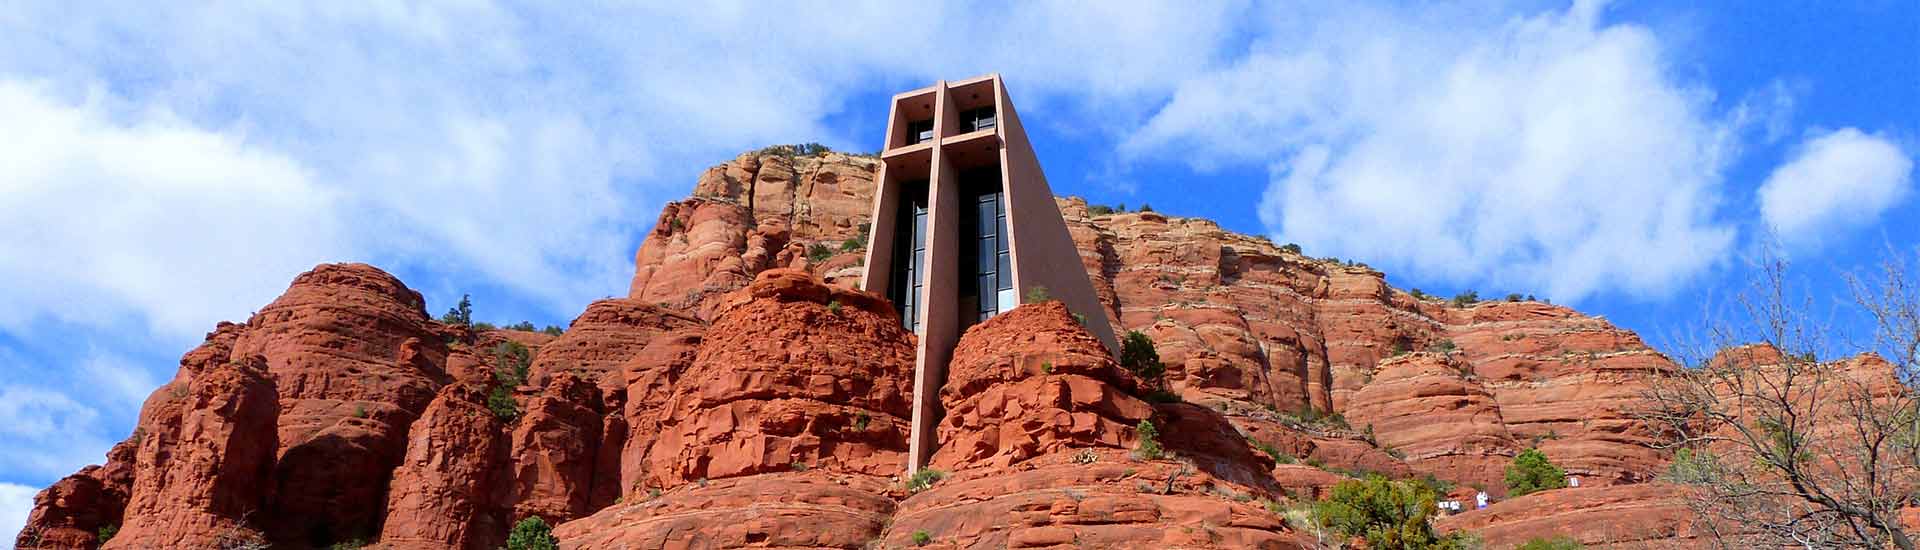 Chapel of the Holy Cross nestled into Sedona's red rocks with blue sky white clouds in back